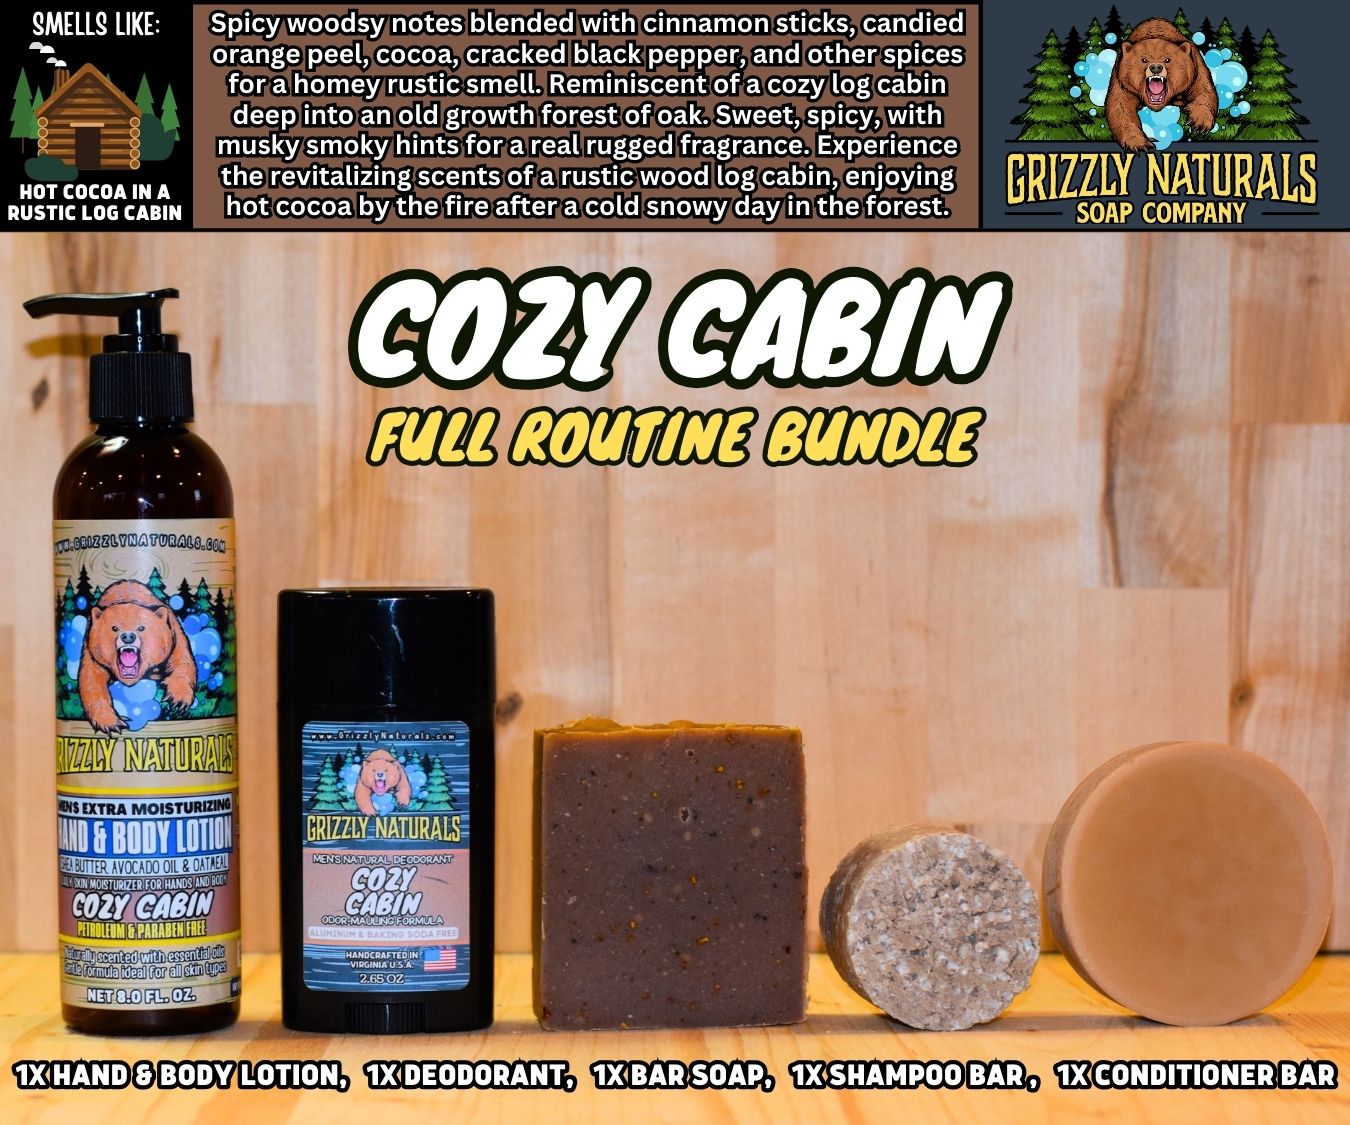 Cozy Cabin Full Routine Bundle - Grizzly Naturals Soap Company